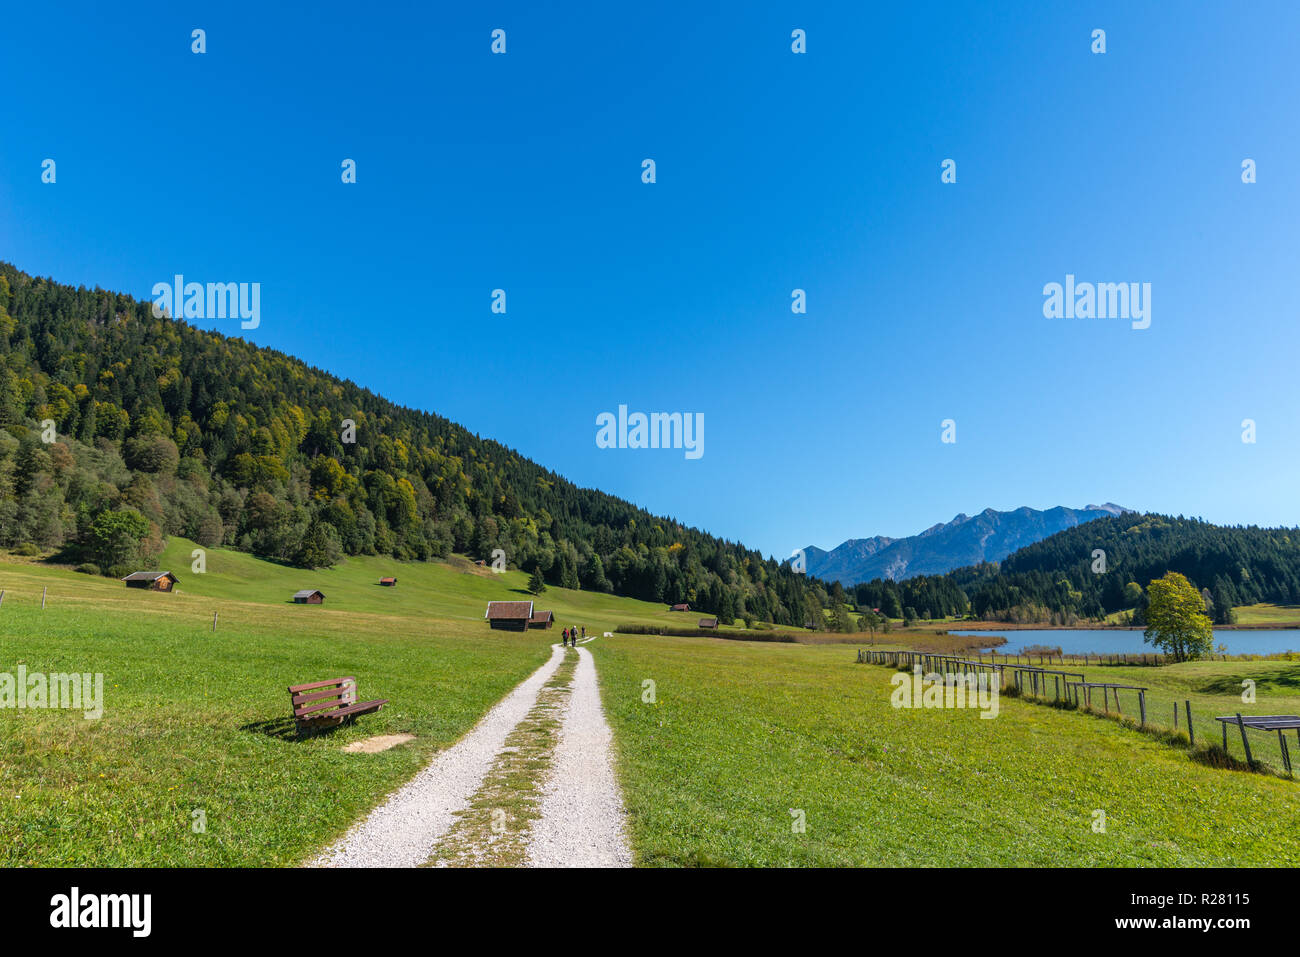 Buckelwiesen or hummocky meadows in the village of Gerold, Krün, foothills of the Alps, Upper Bavaria, Bavaria, South Germany, Europe Stock Photo